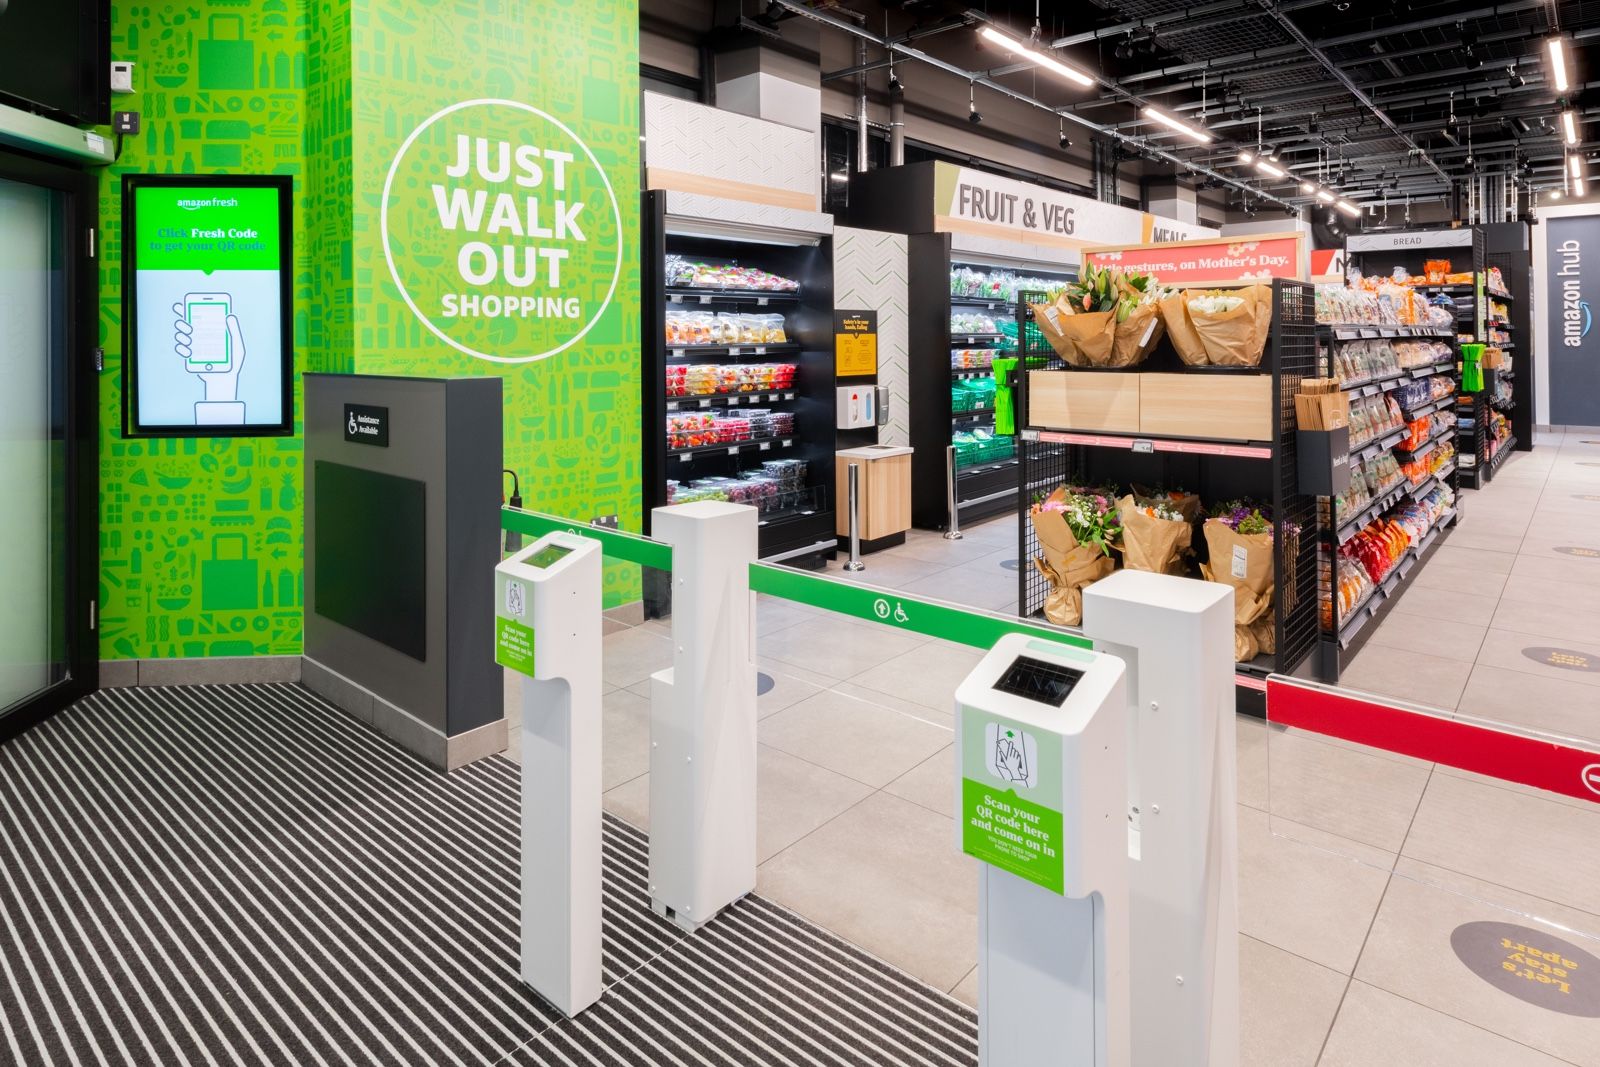 Amazon opens its first cashier-free store in the UK - just walk out! photo 3